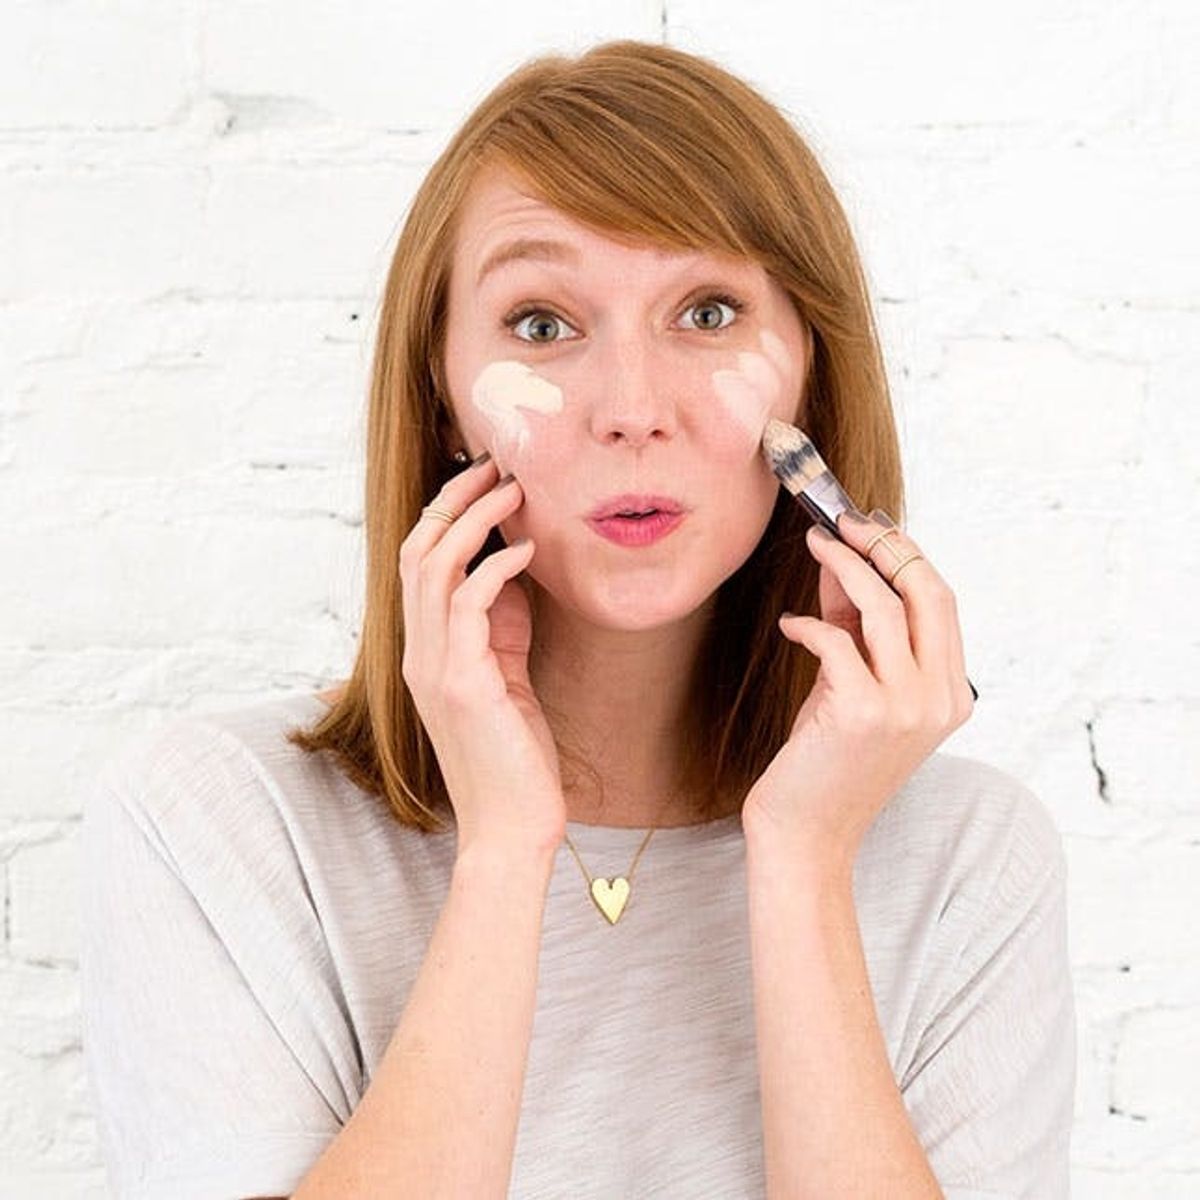 Beauty Mythbuster: Should You Apply Foundation With a Brush or Your Fingers?